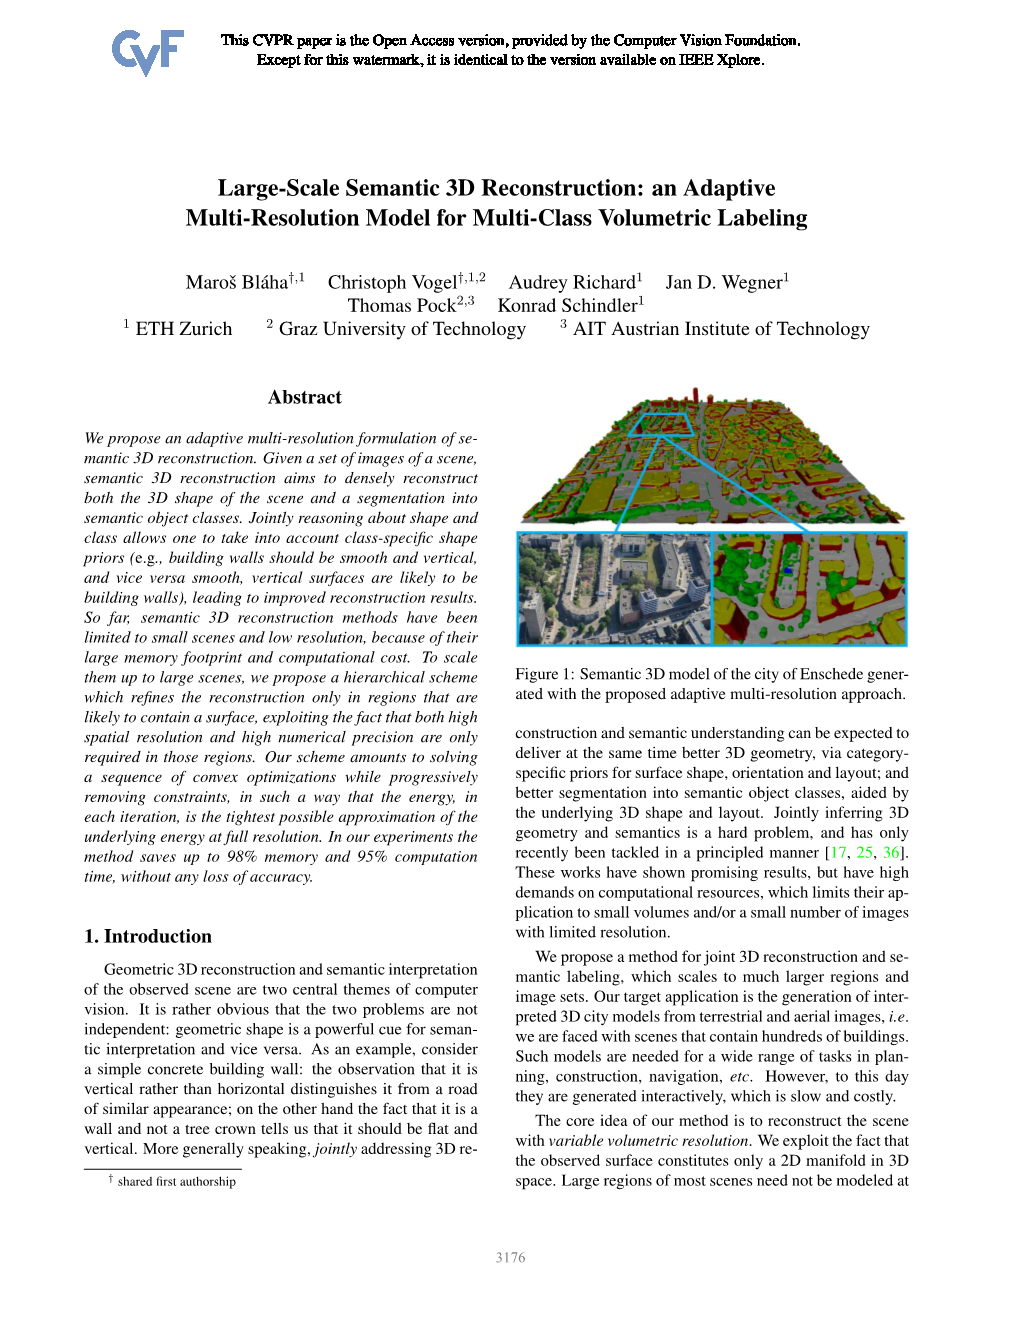 Large-Scale Semantic 3D Reconstruction: an Adaptive Multi-Resolution Model for Multi-Class Volumetric Labeling